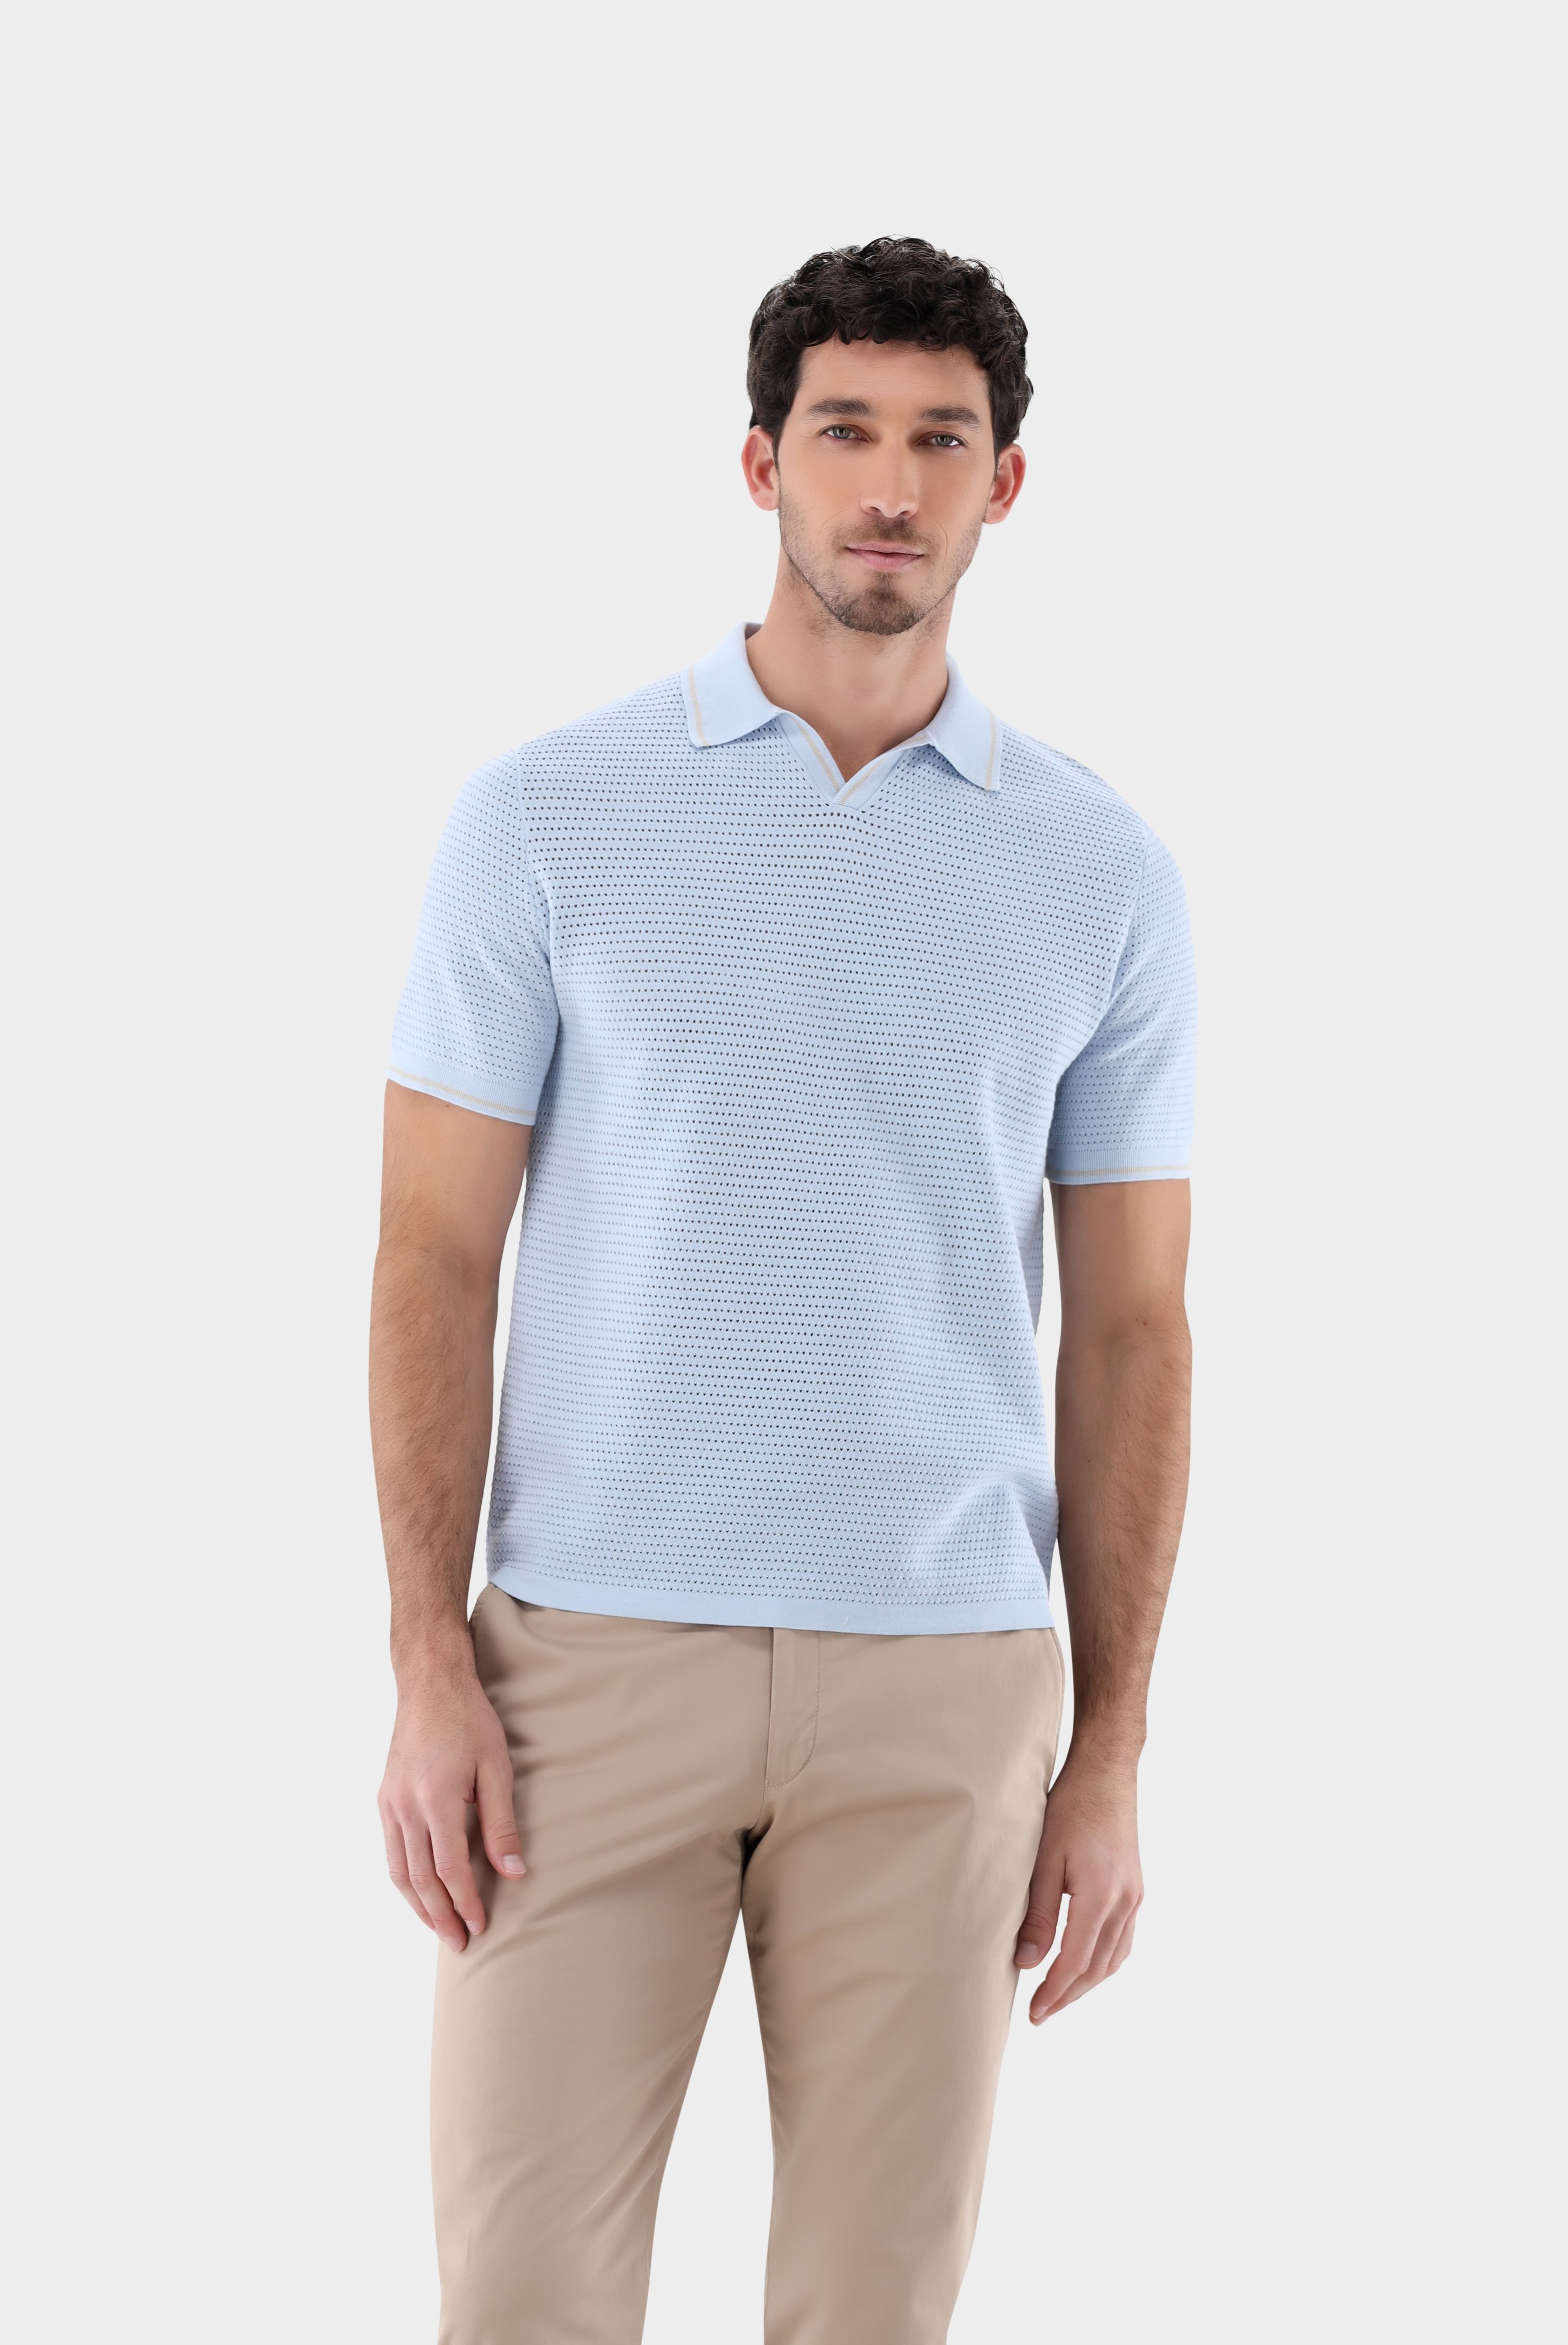 Poloshirts+V-neck polo in mesh structure with contrast collar+82.8996.S7.S00267.720.S